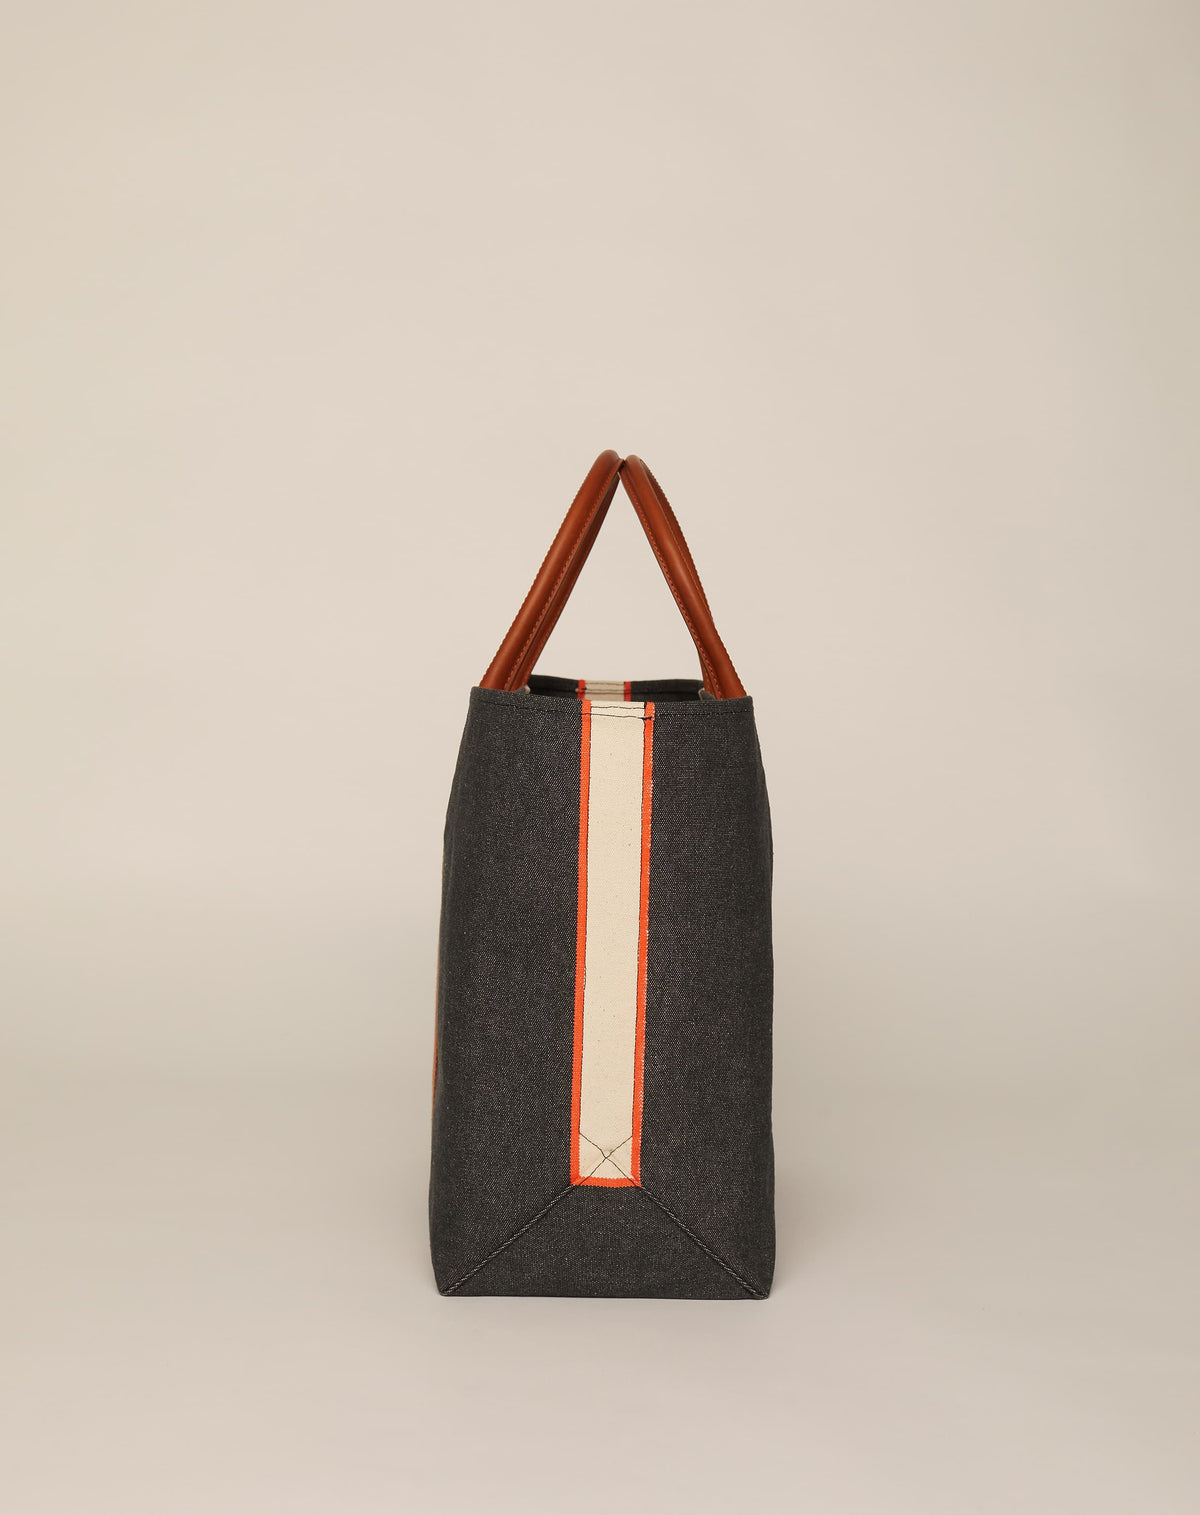 Profile image of classic canvas tote bag in washed black colour with tan leather handles and contrasting stripes.